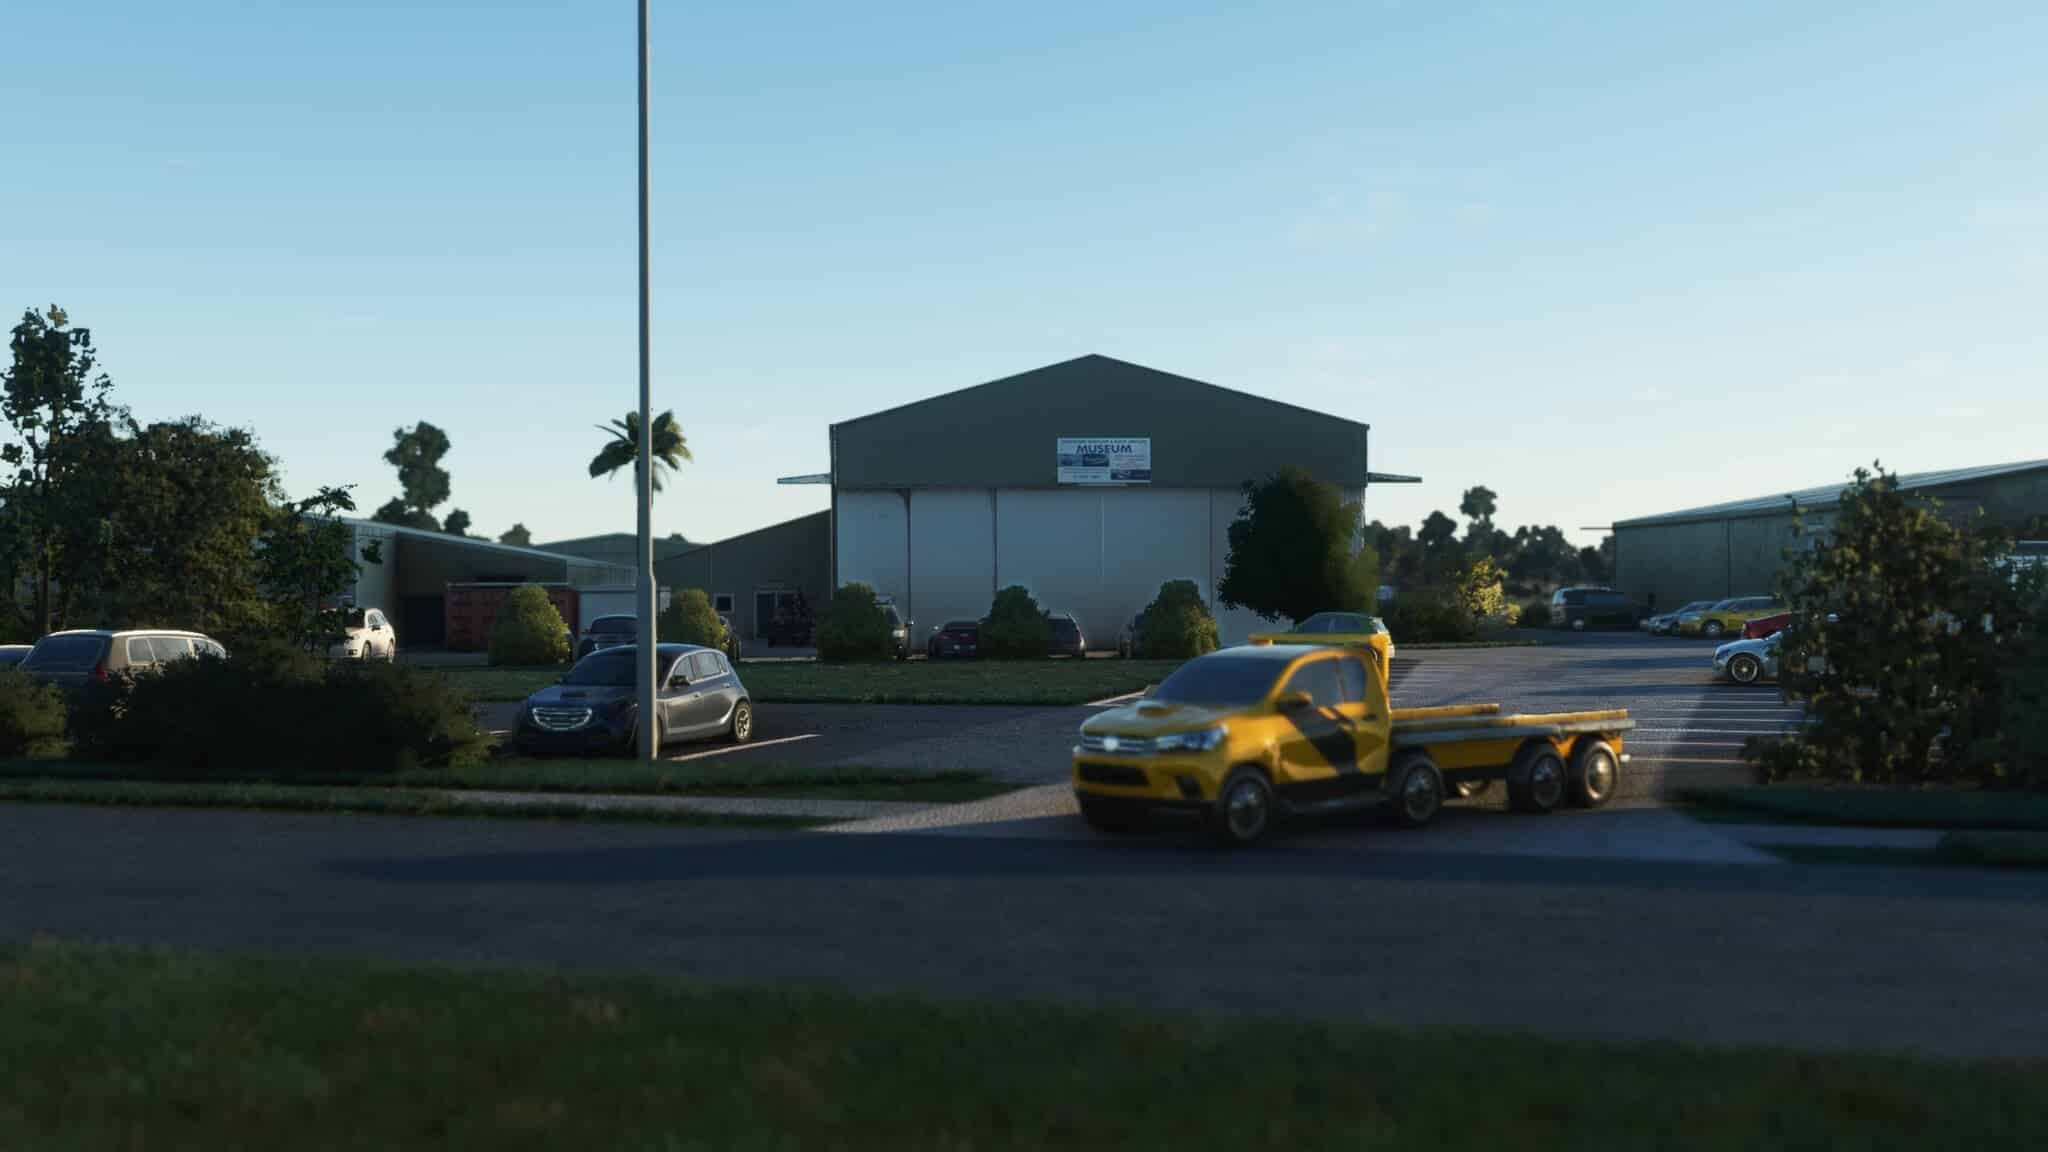 Orbx Partners with Pushback Studio and Releases Caboolture Airfield for MSFS - Pushback Studios